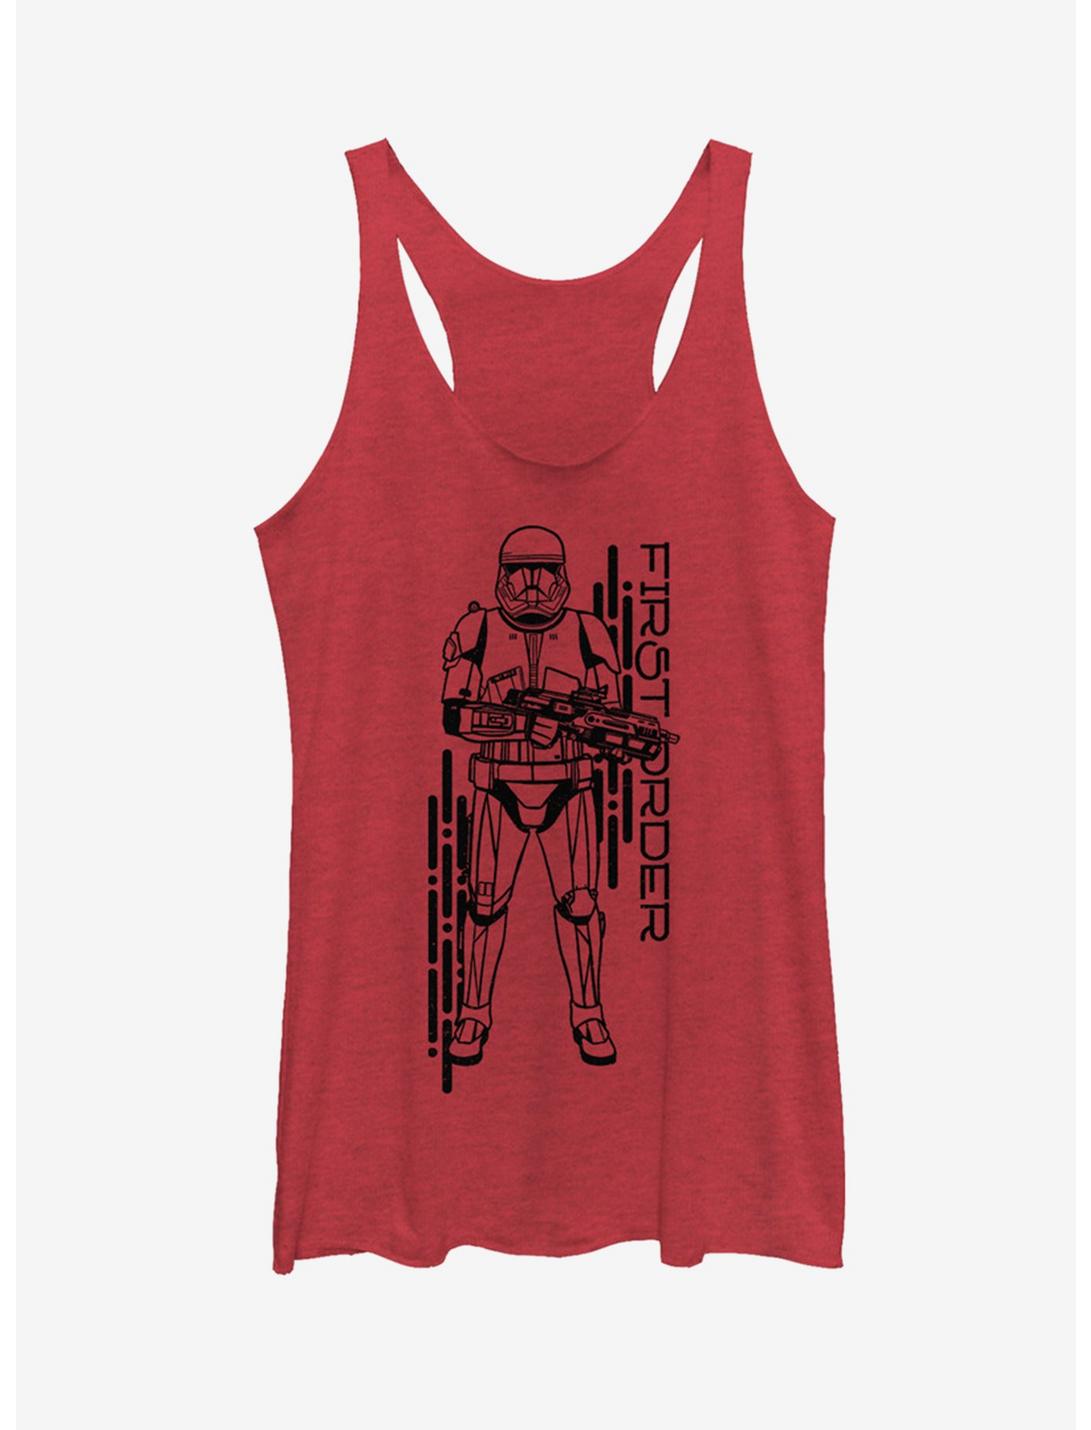 Star Wars Episode IX The Rise Of Skywalker Project Red Womens Tank Top, RED HTR, hi-res